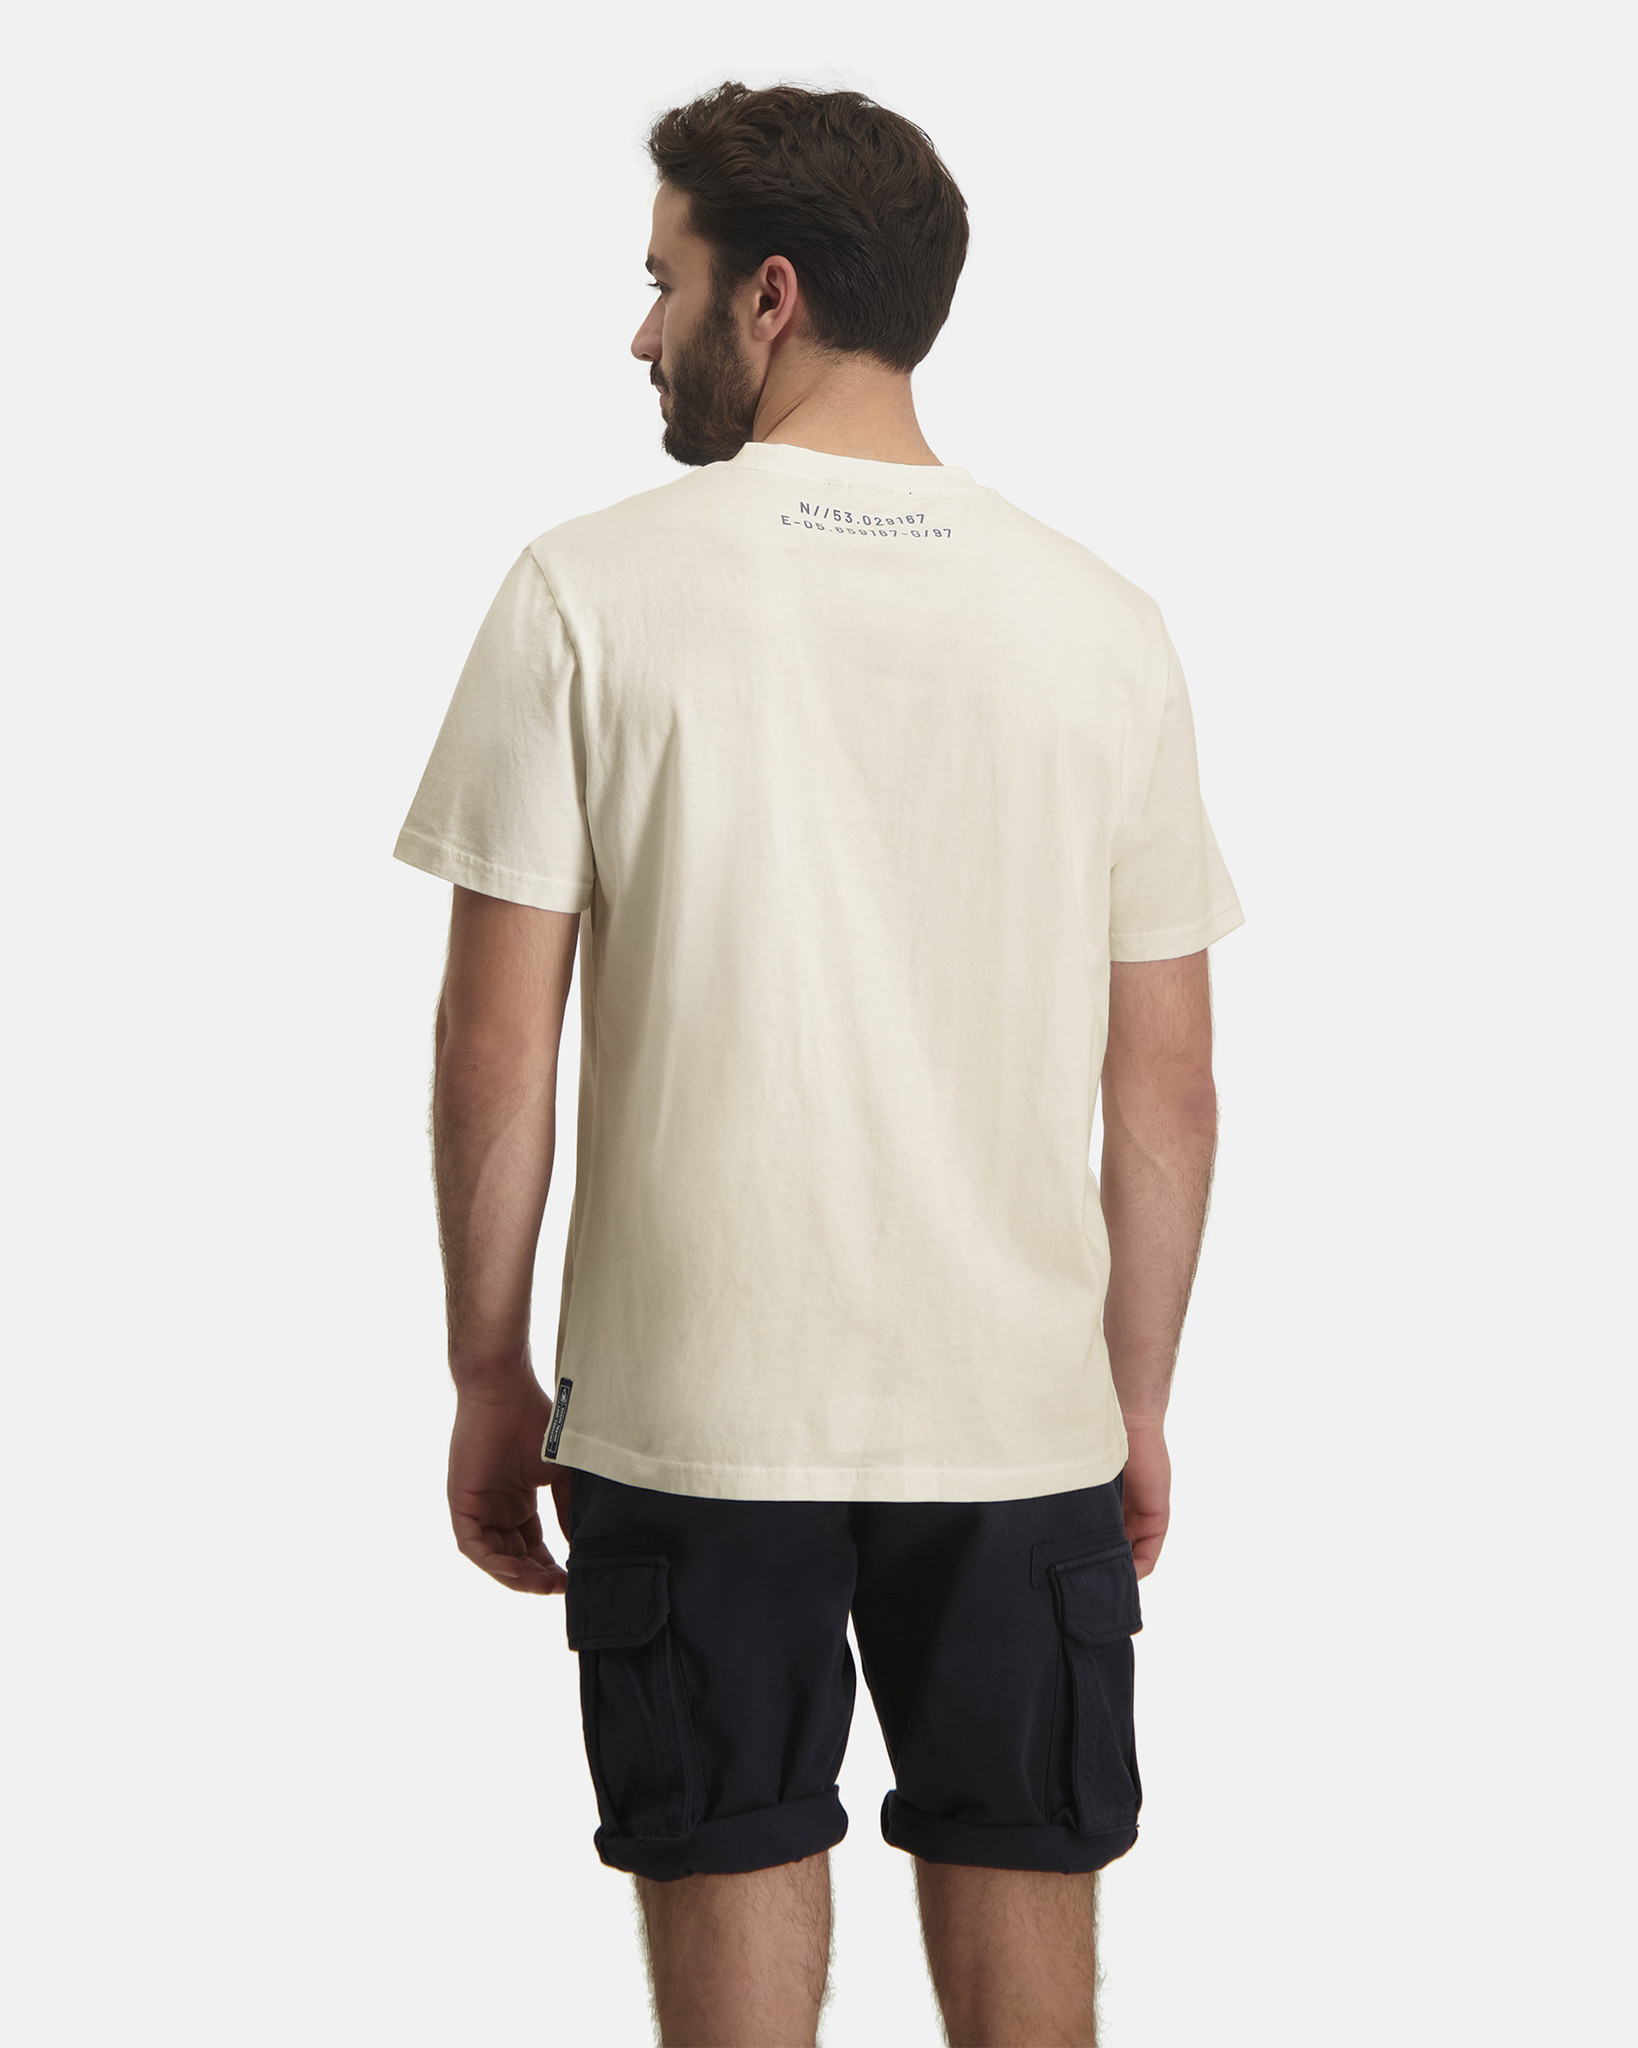 The 100% Cotton Mike T-shirt